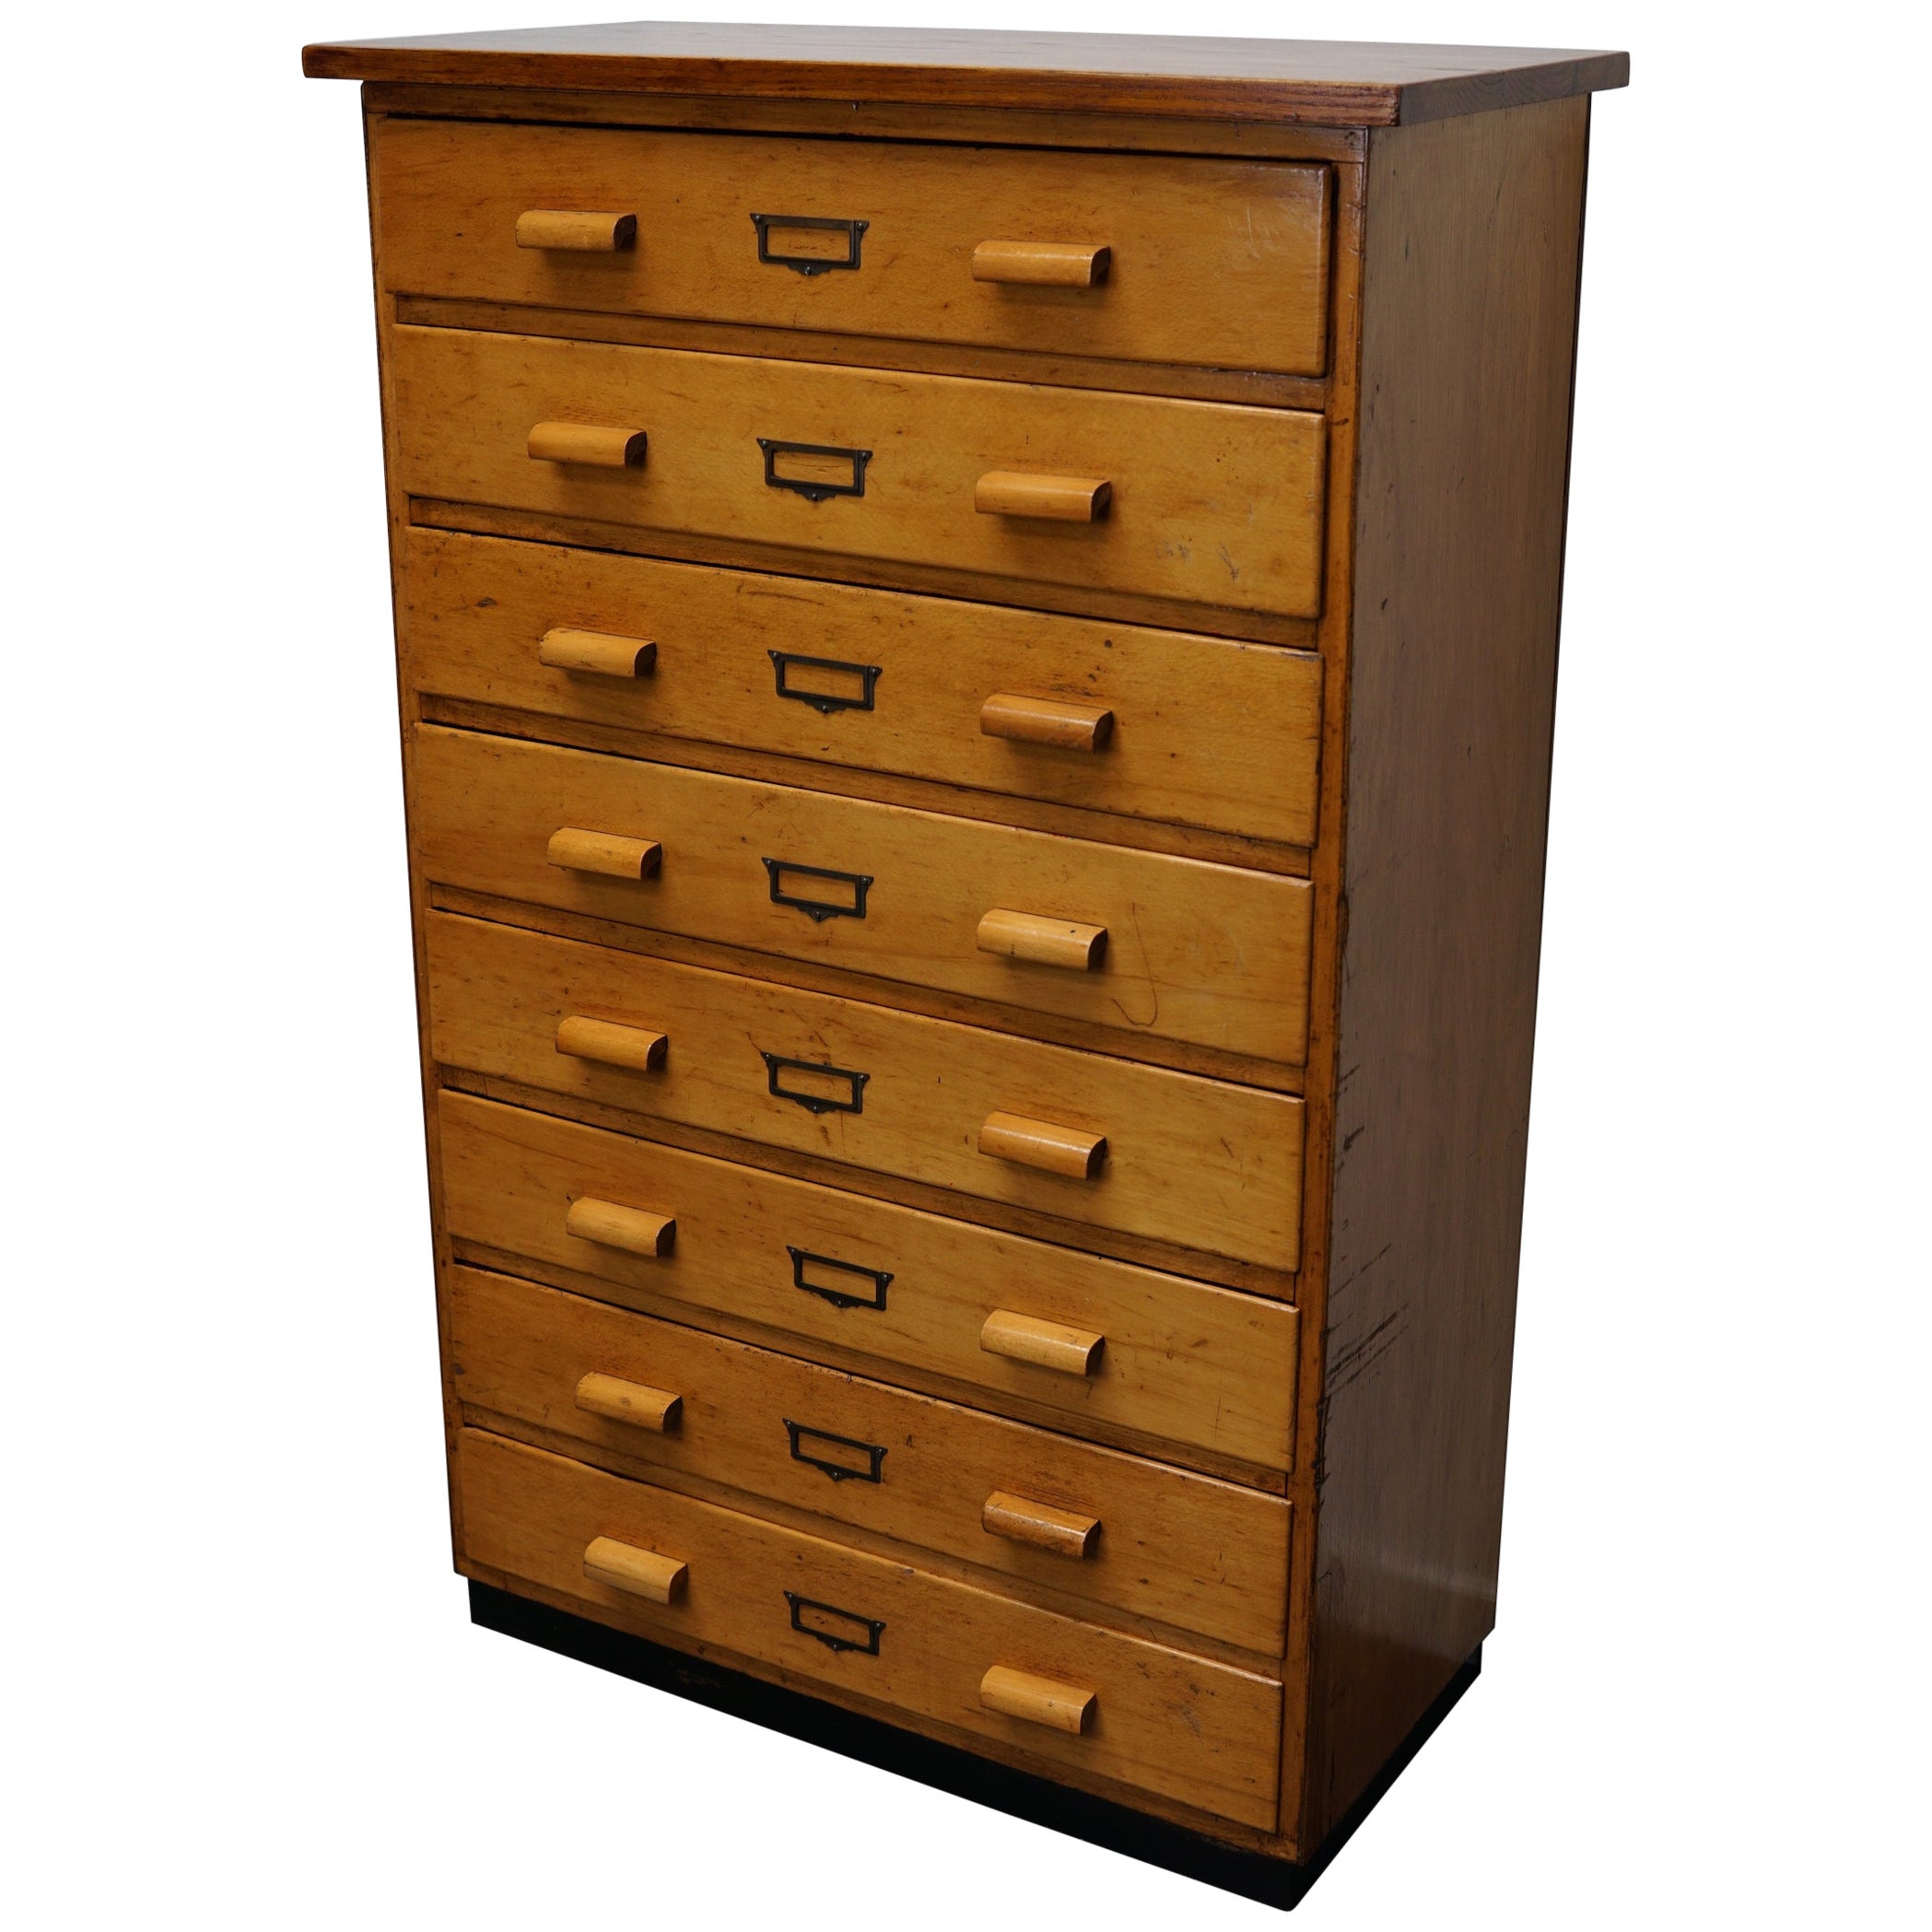 German Beech Industrial Apothecary Cabinet, Mid-20th Century For Sale